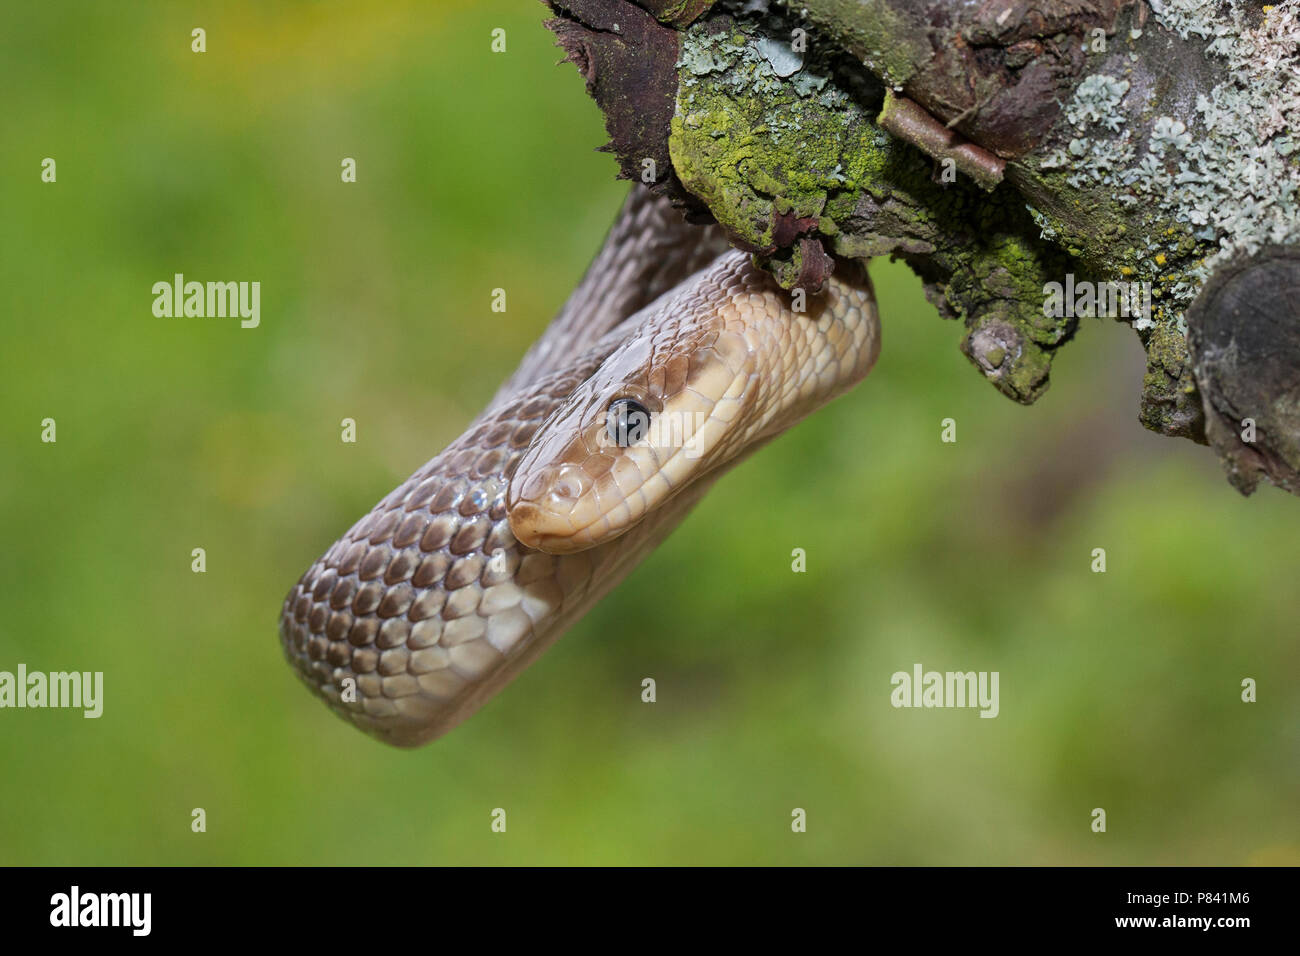 Esculaapslang in een boom, Aesculapian Snake in a tree Stock Photo